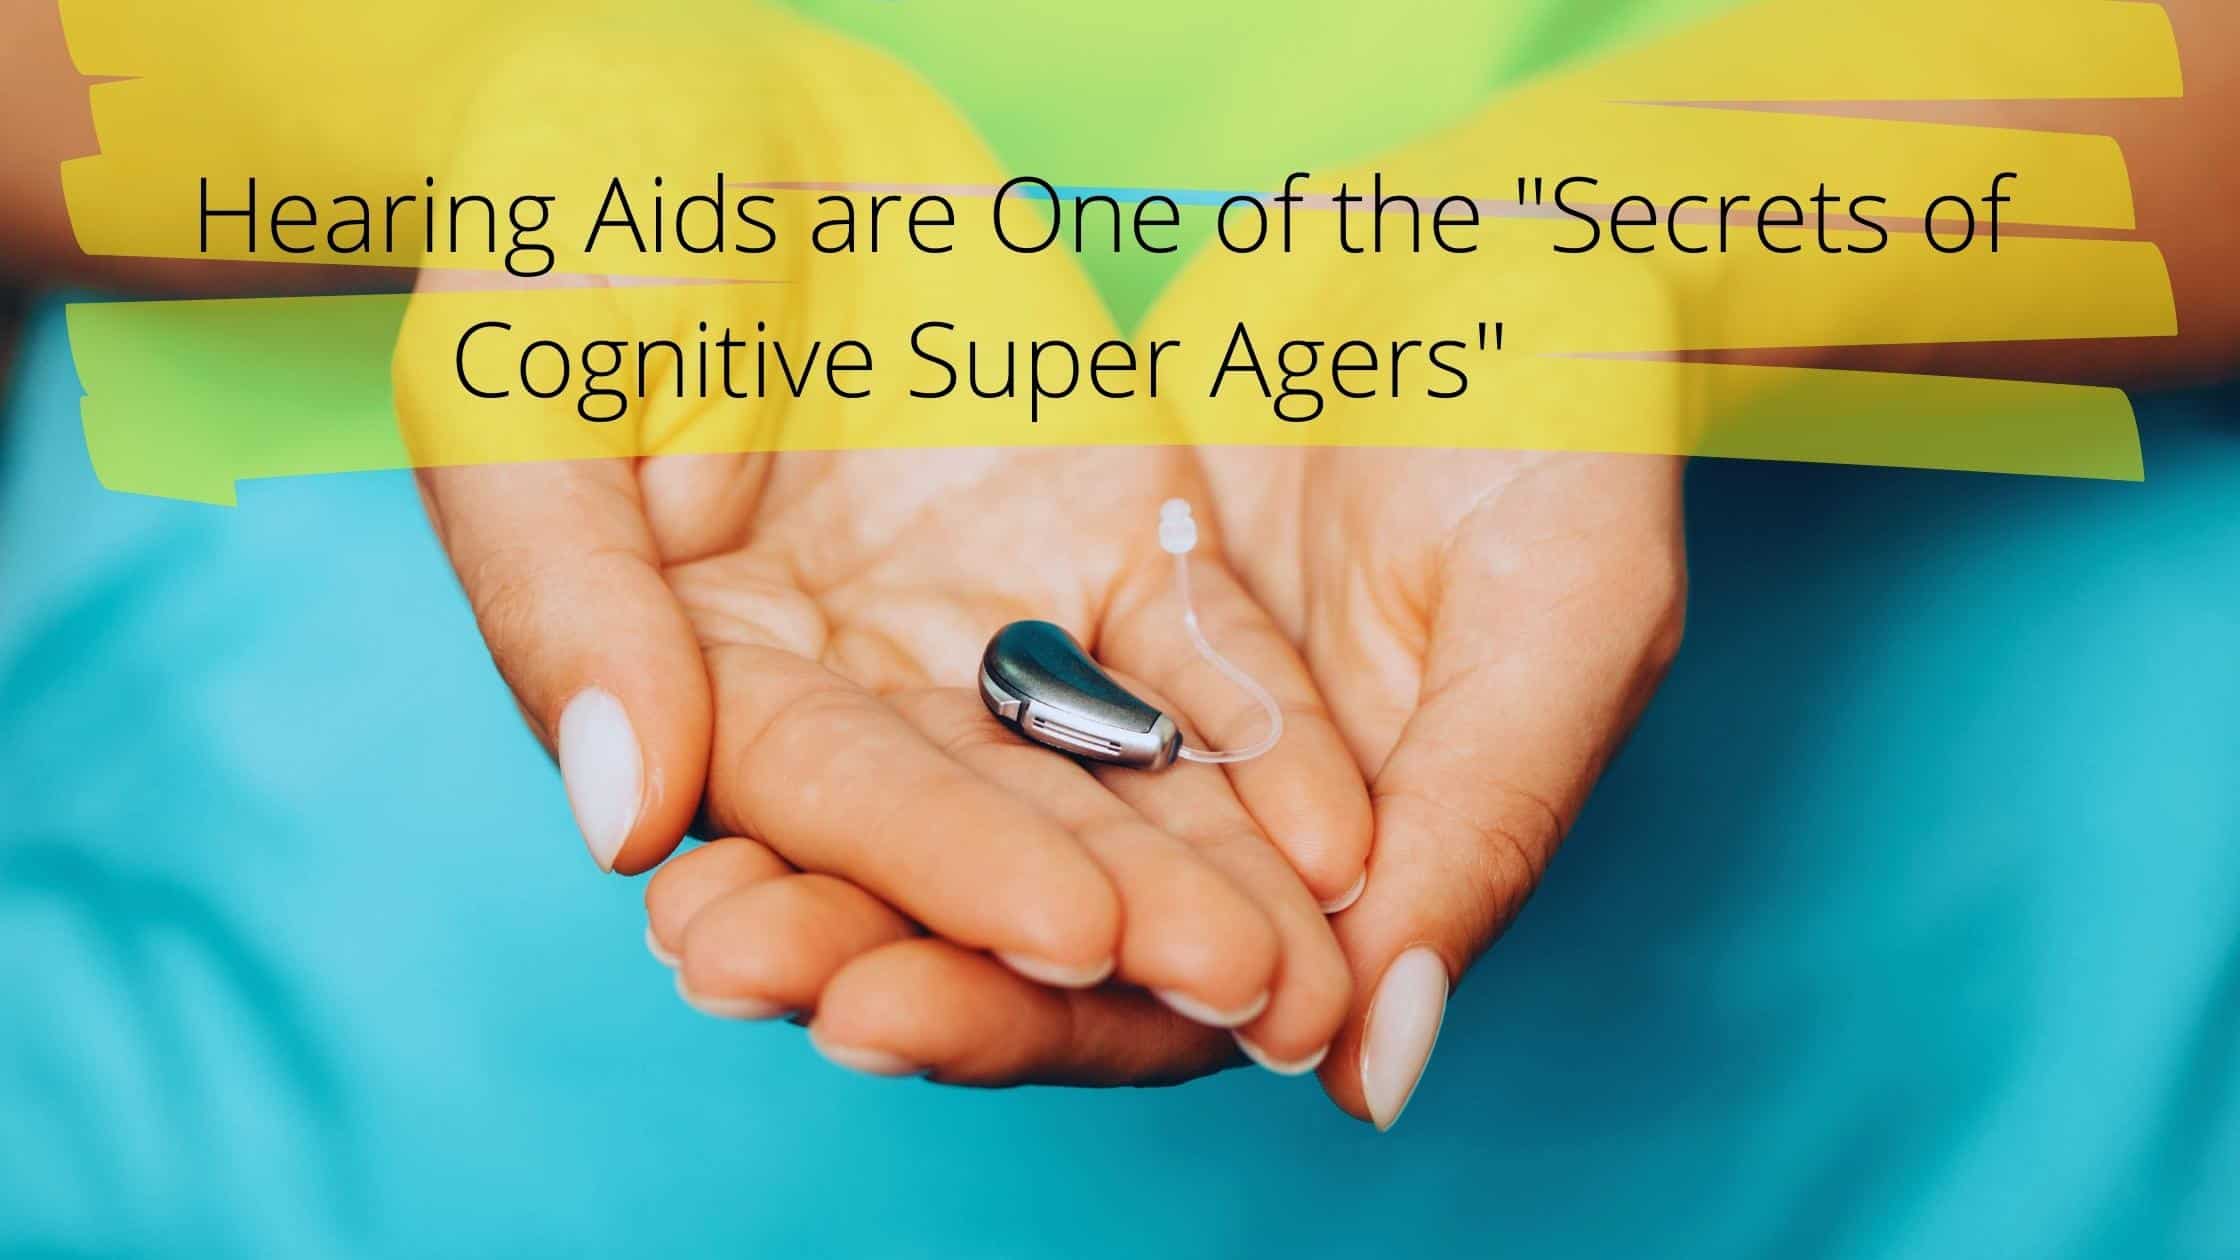 hearing aids are one of the secrets of cognitive super agers